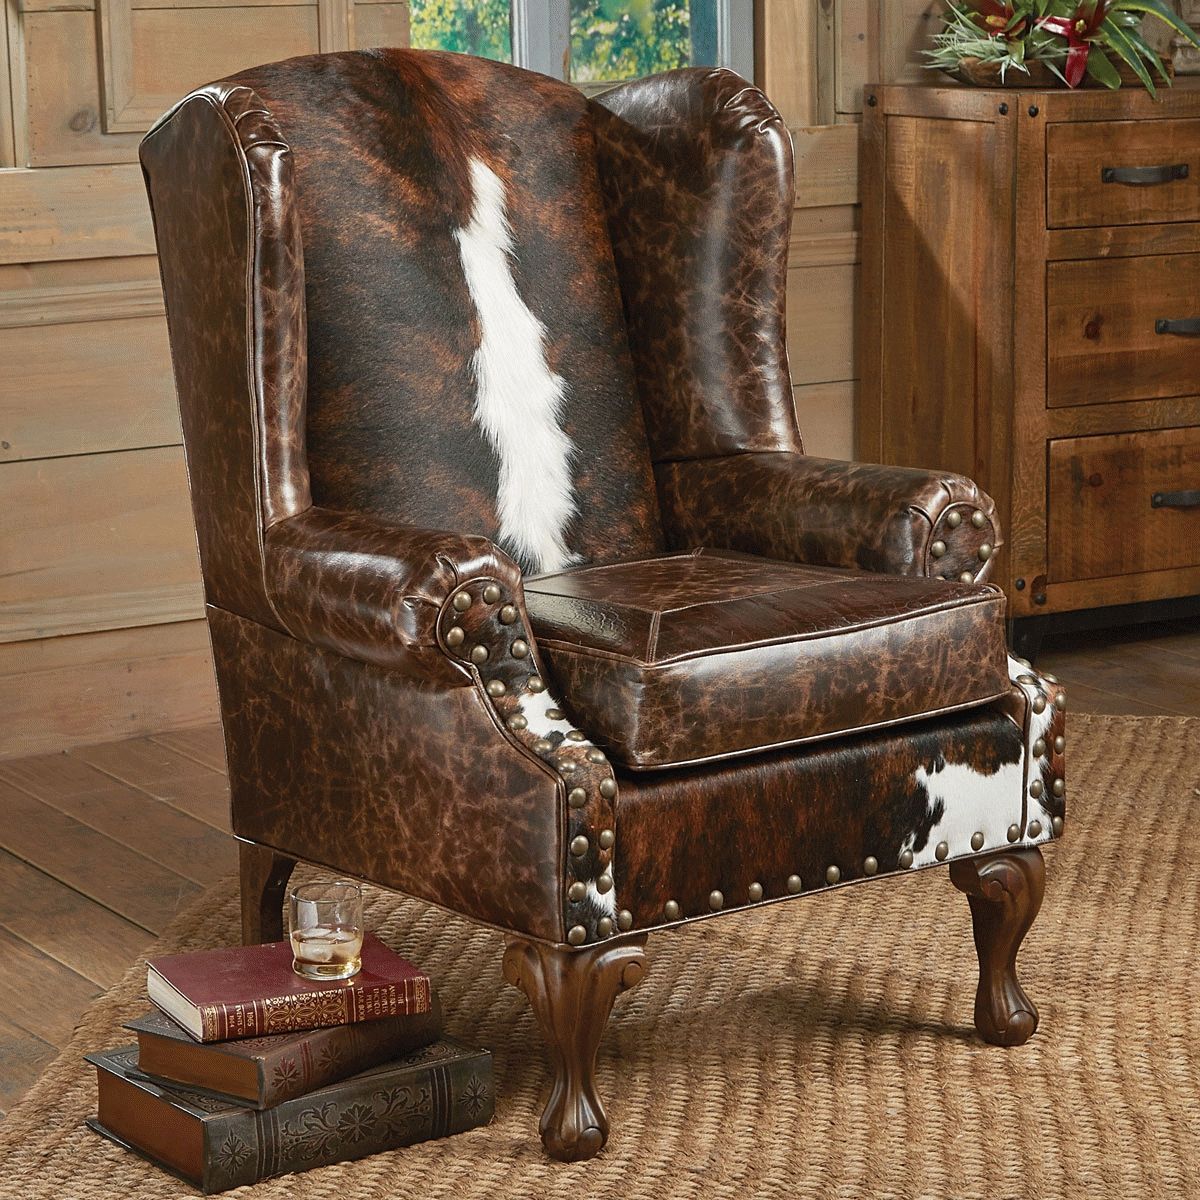 Western Leather Furniture & Cowboy Furnishings From Lones Star Regarding Cowhide Sofas (Photo 4 of 15)